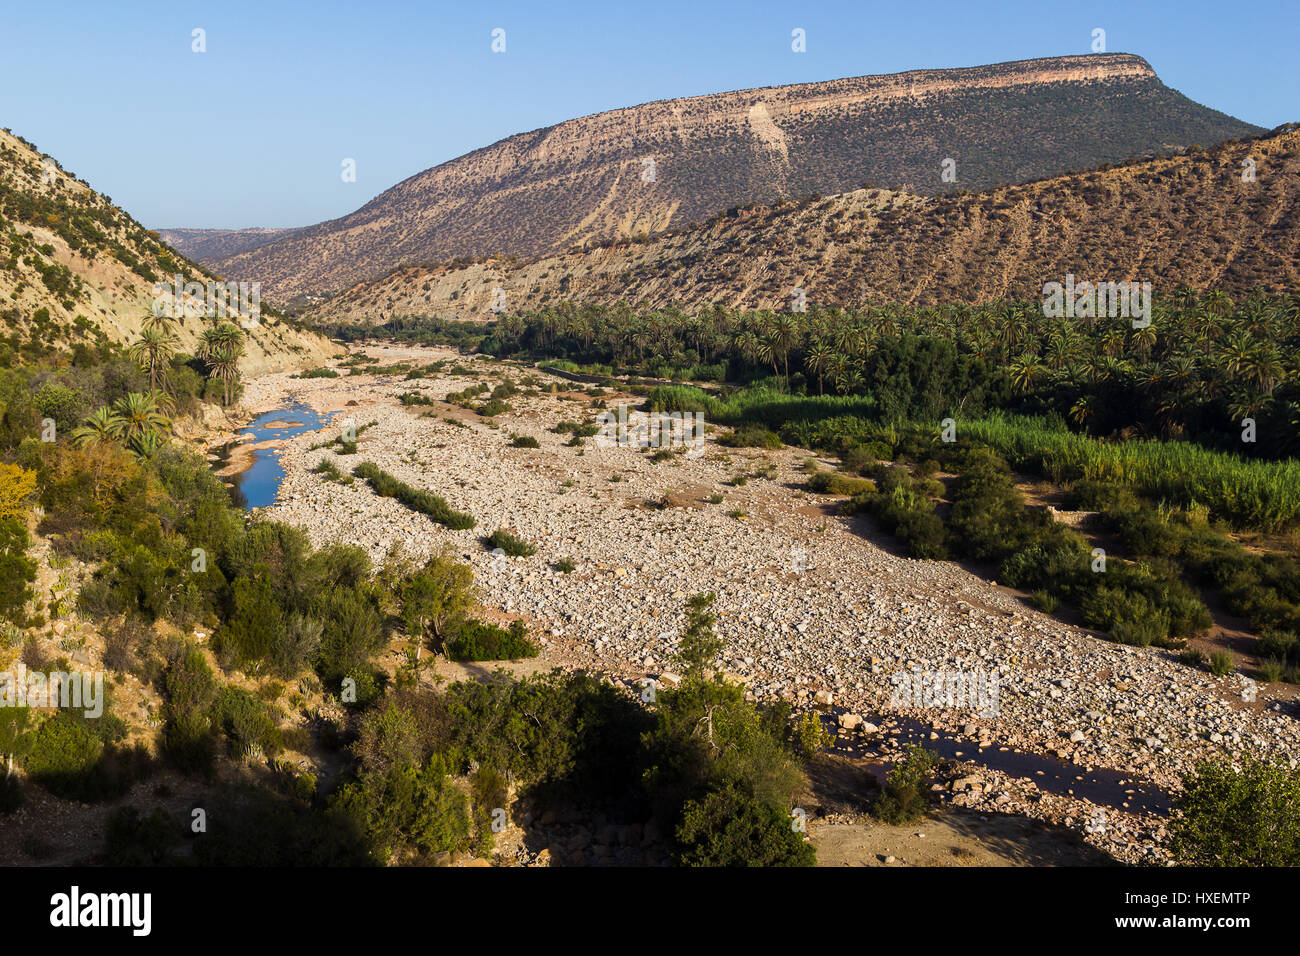 Looking down on a dried up river bed on the edge of the Atlas Mountains in Morocco. Stock Photo